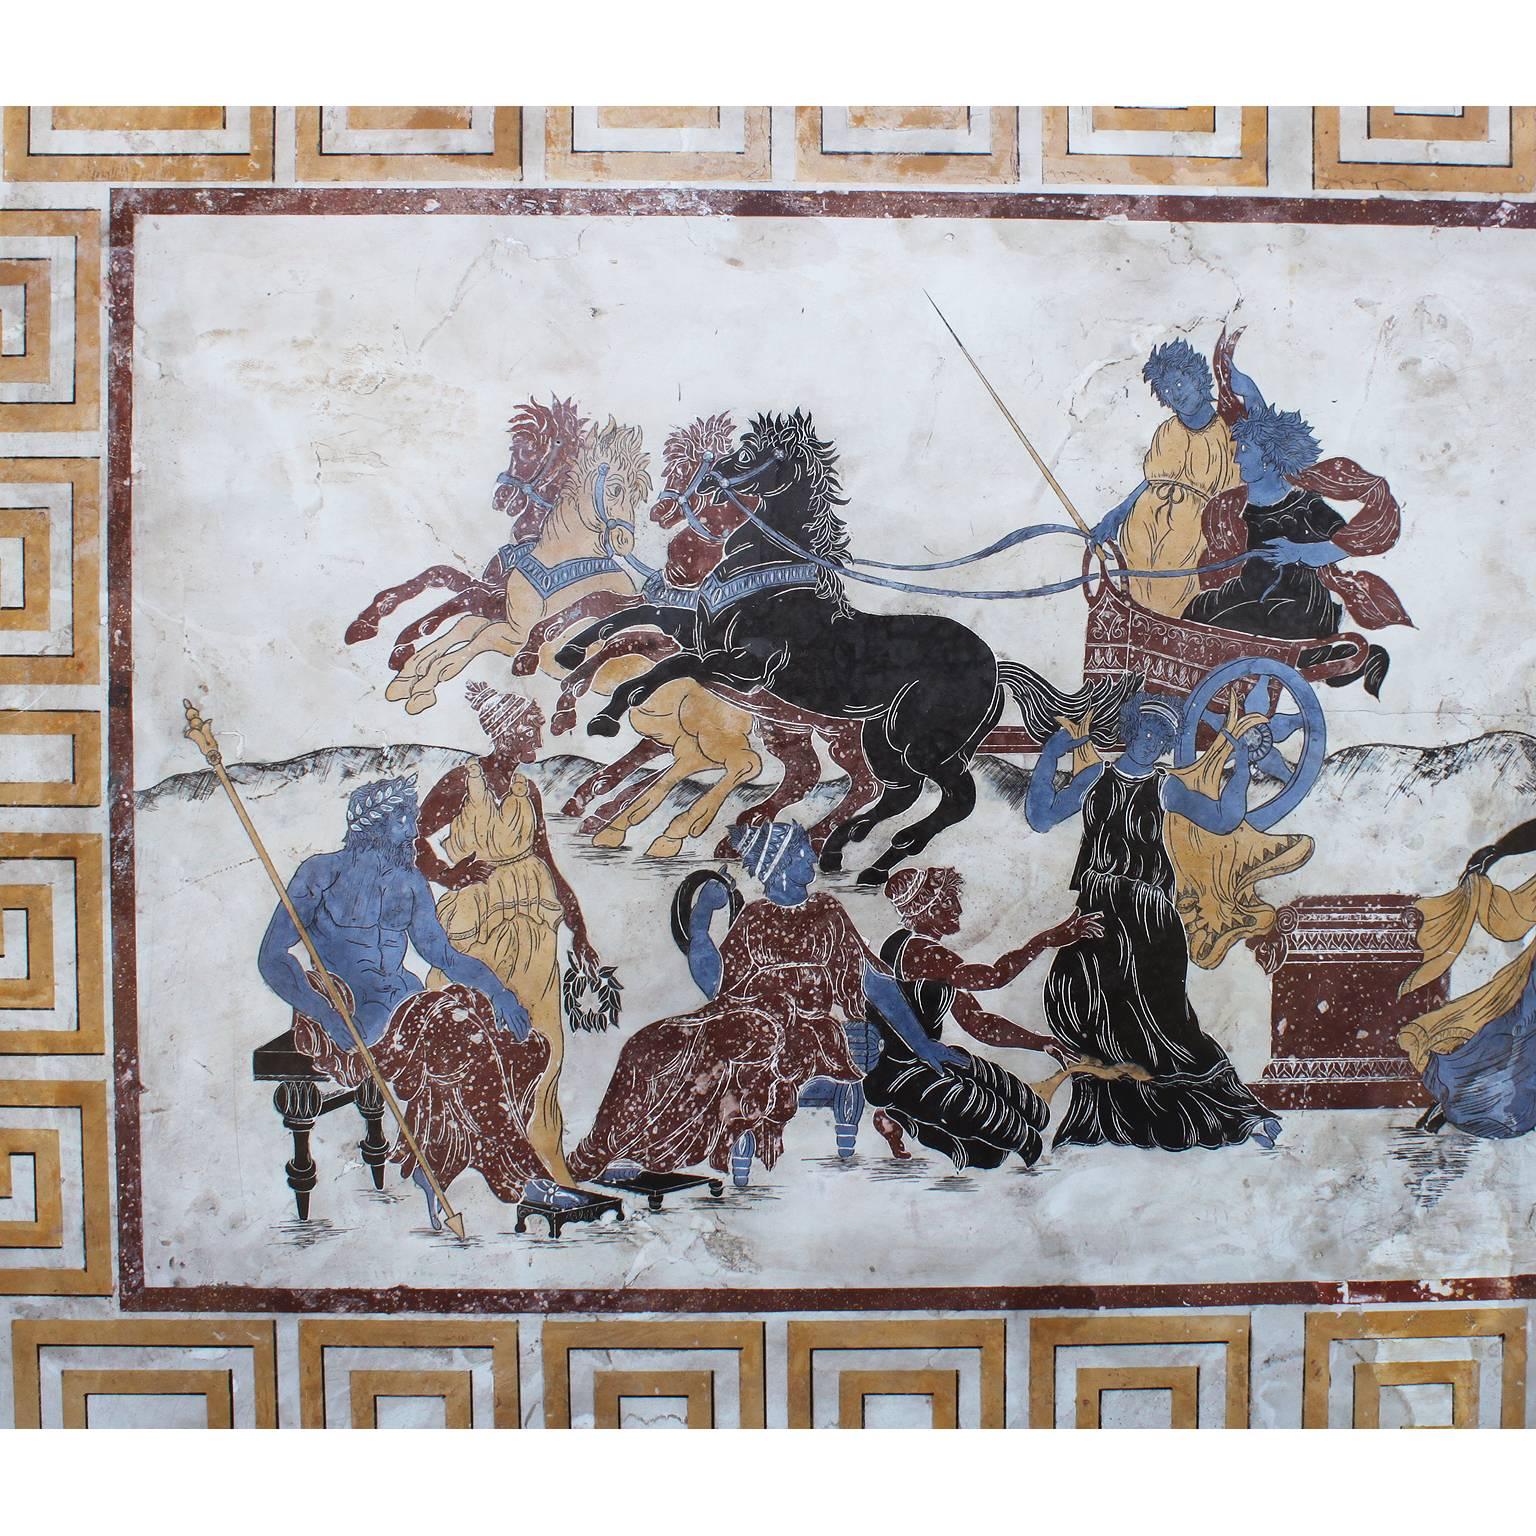 A large Italian 19th-20th century neoclassical and Greco-Roman style architectural scagliola wall plaque depicting chariots, horses, allegorical maidens and gods, inlaid and painted in Imperial porphyry, sienna and other colorful stones and